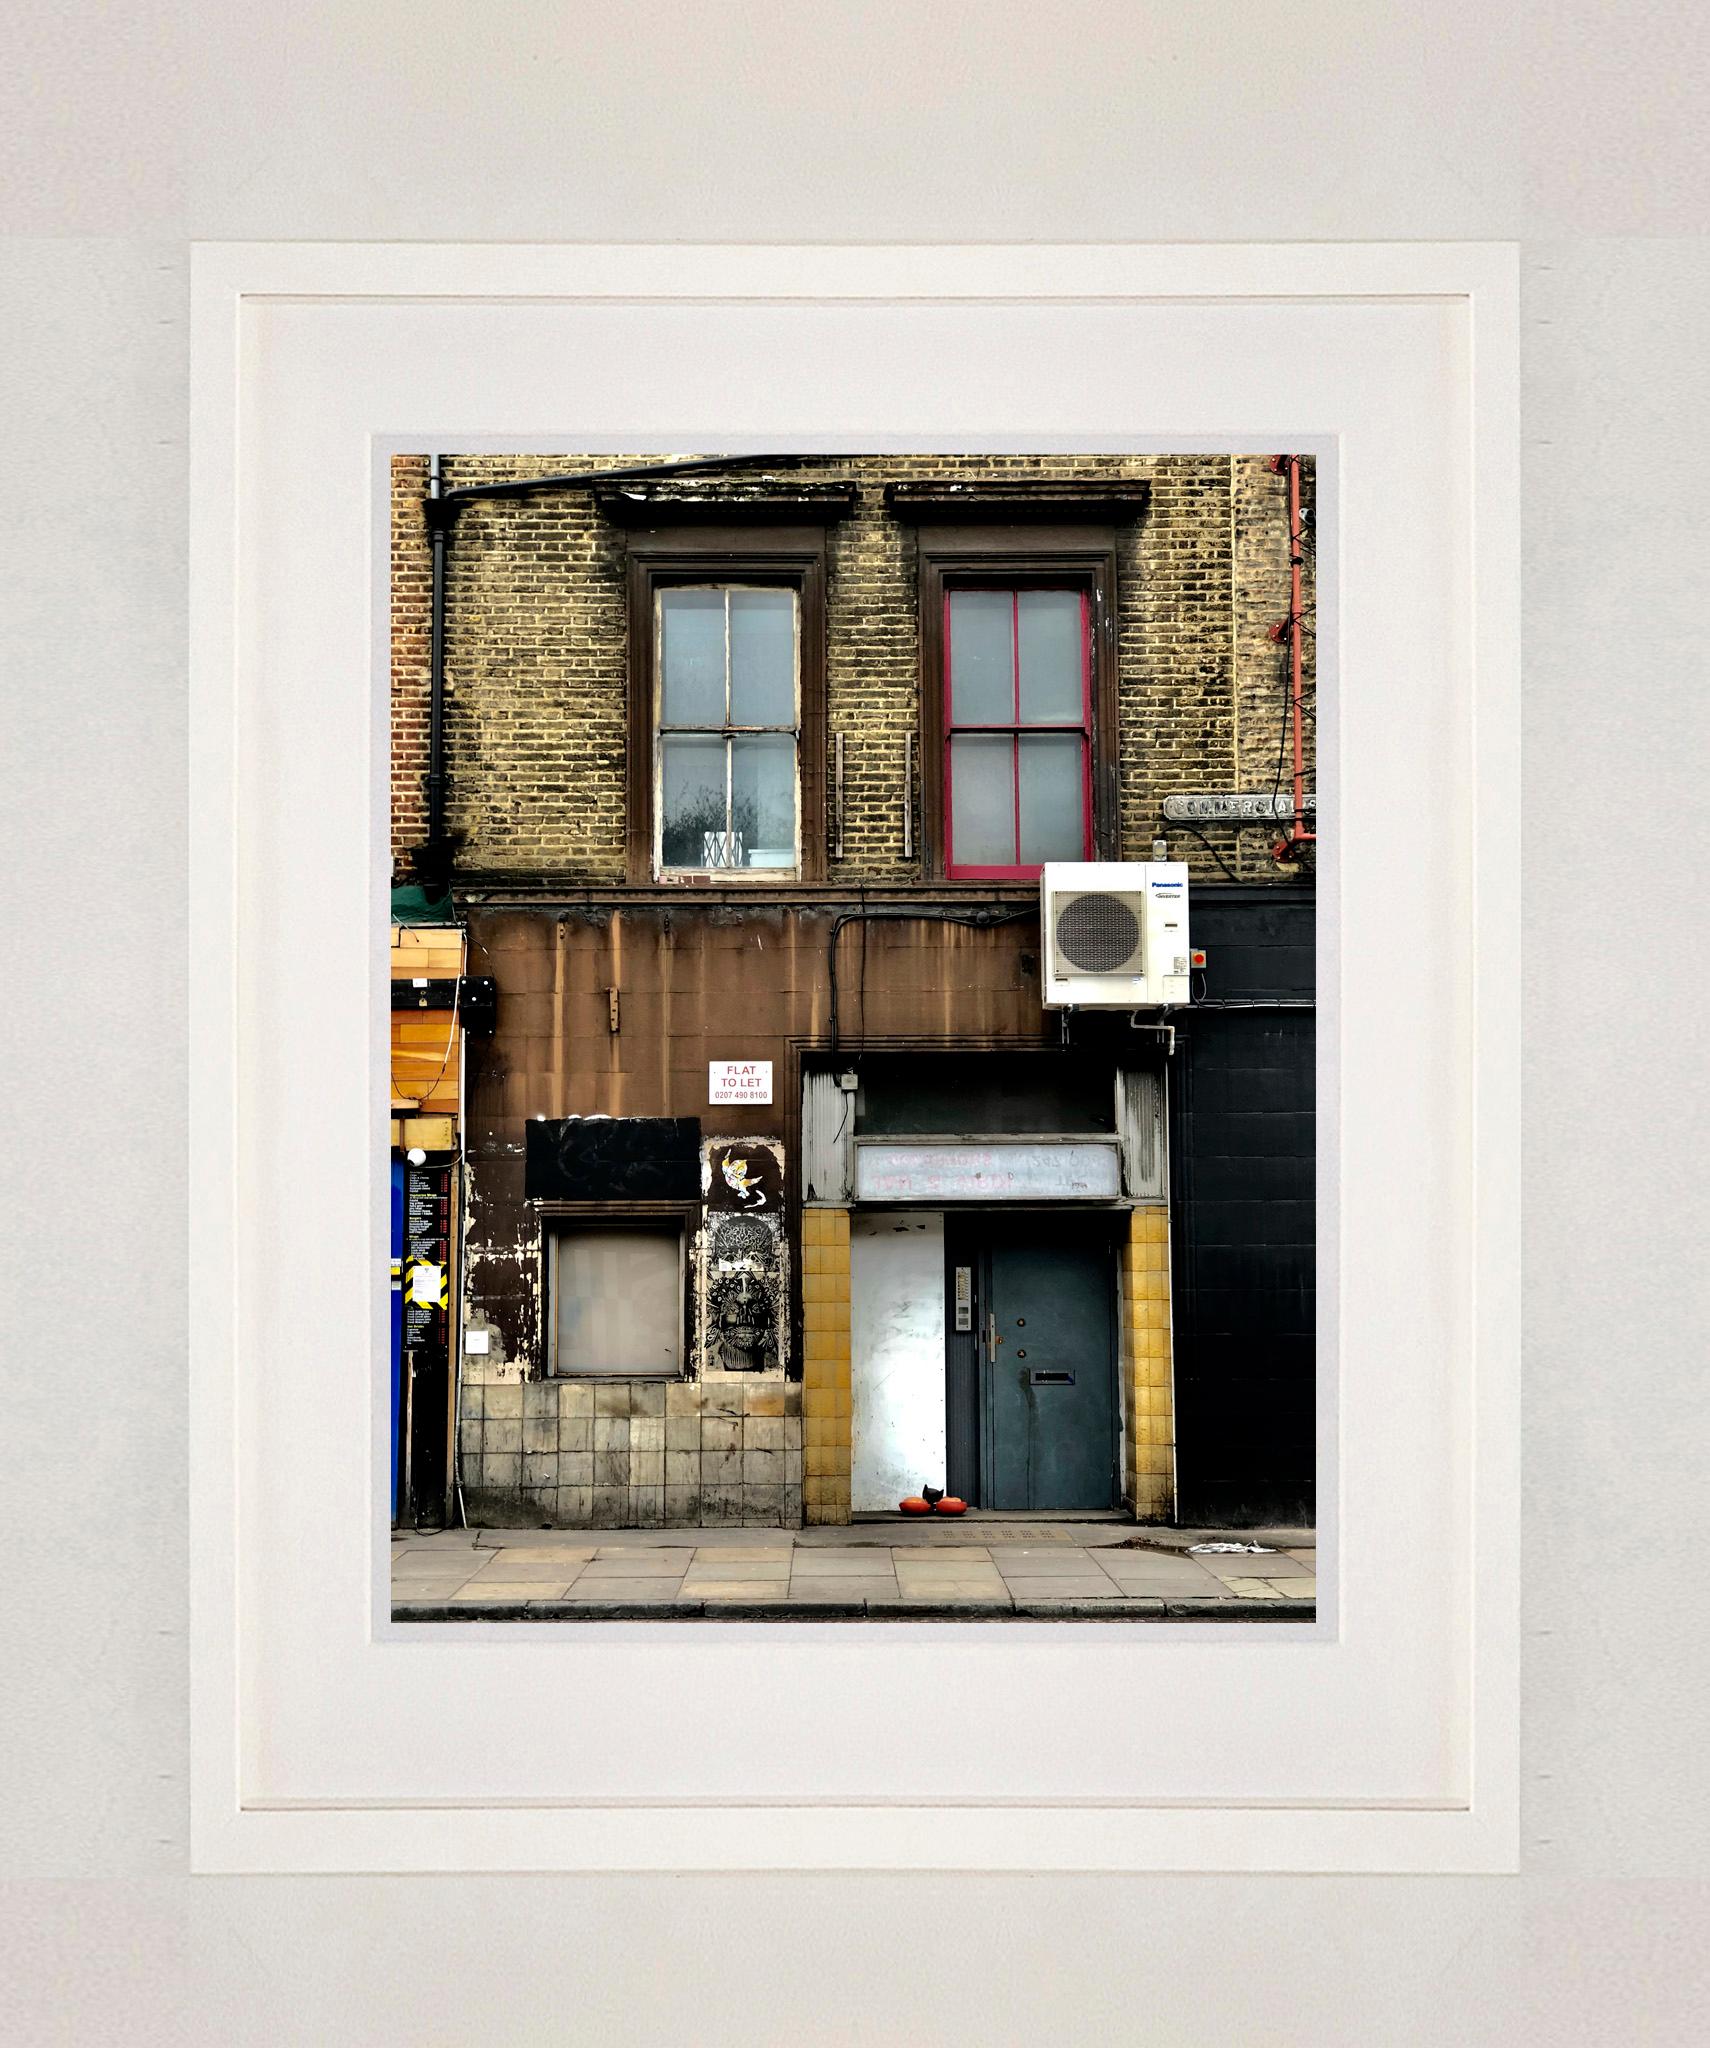 Flat to Let, London - East London architecture street photography - Contemporary Print by Richard Heeps